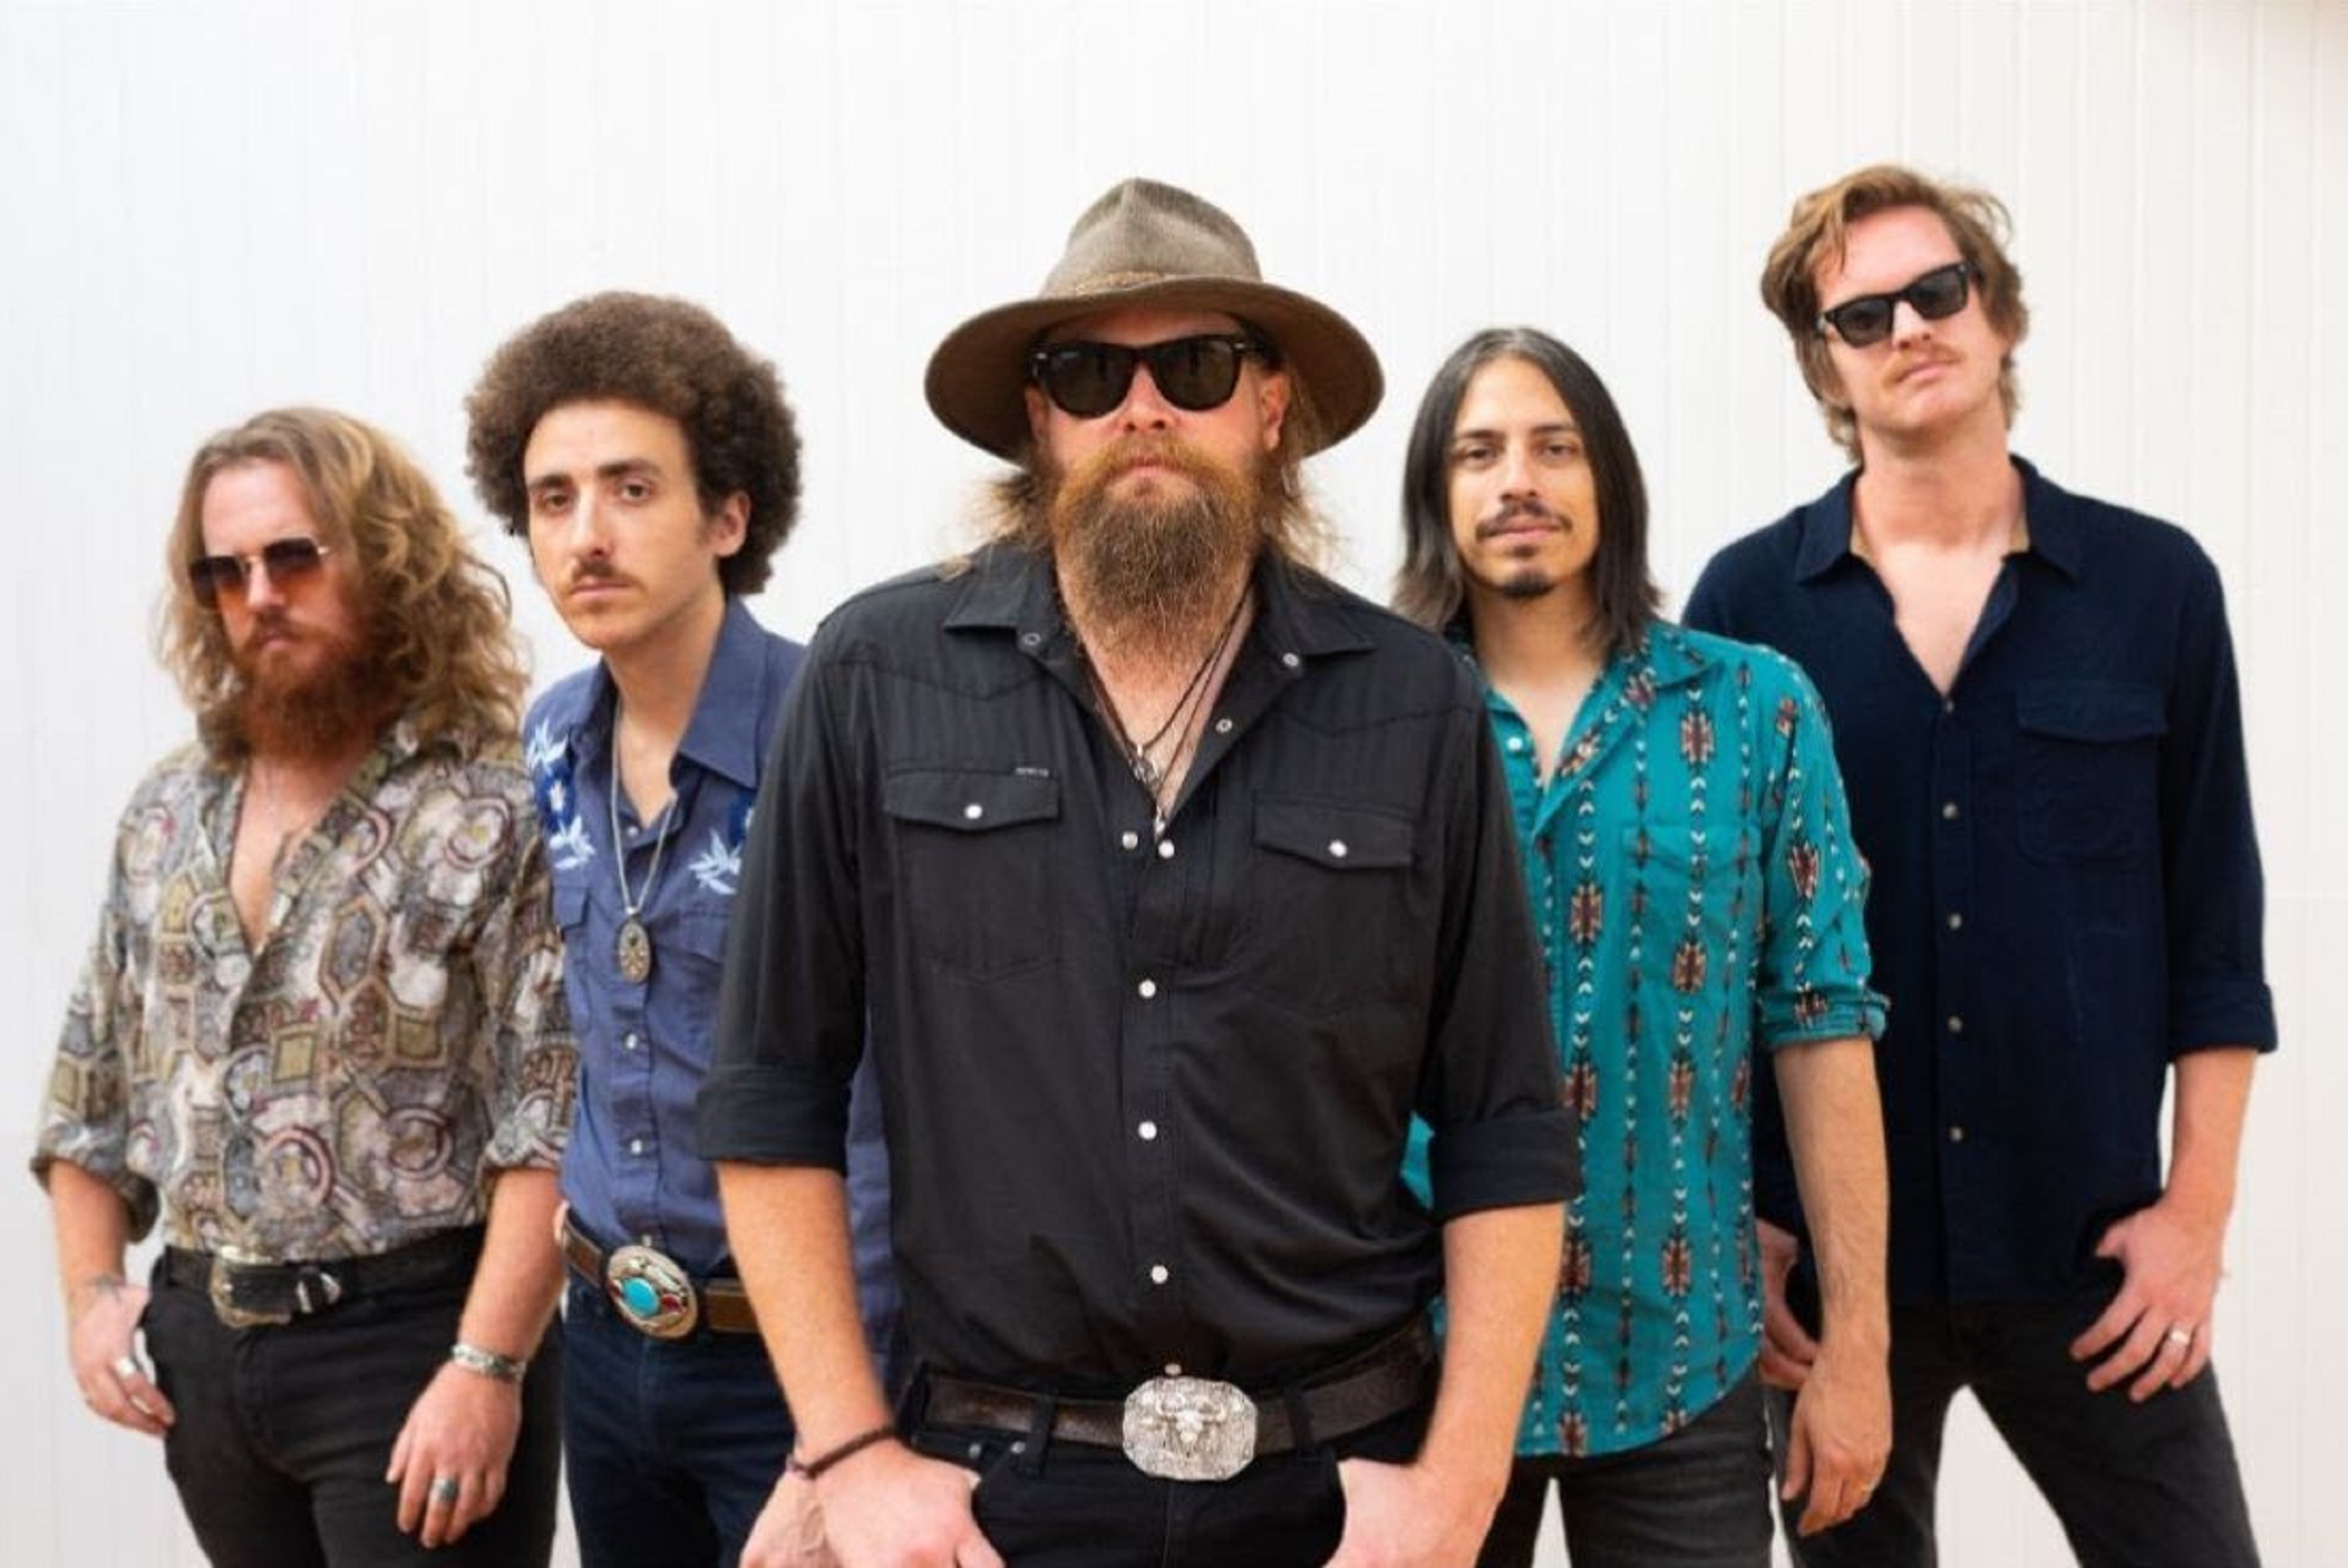  Southern Rock Titans Robert Jon & The Wreck Drop New Single "Hold On,” A Soulful Ode To The Touring Life